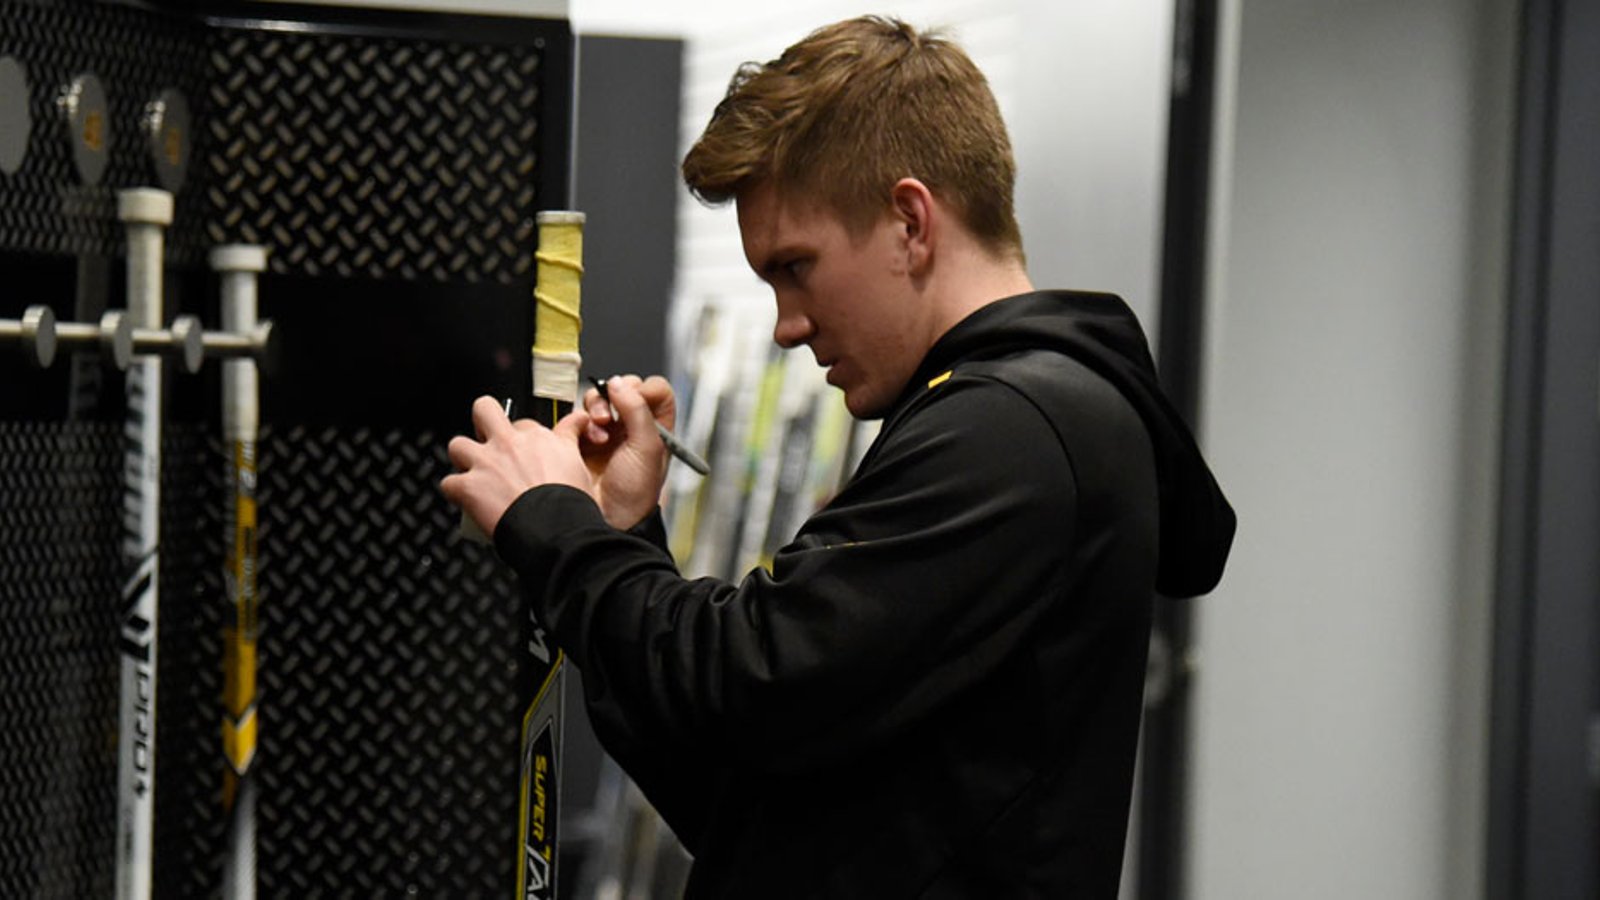 Cameron Hughes makes NHL debut as Bruins shuffle lines for game against Pens